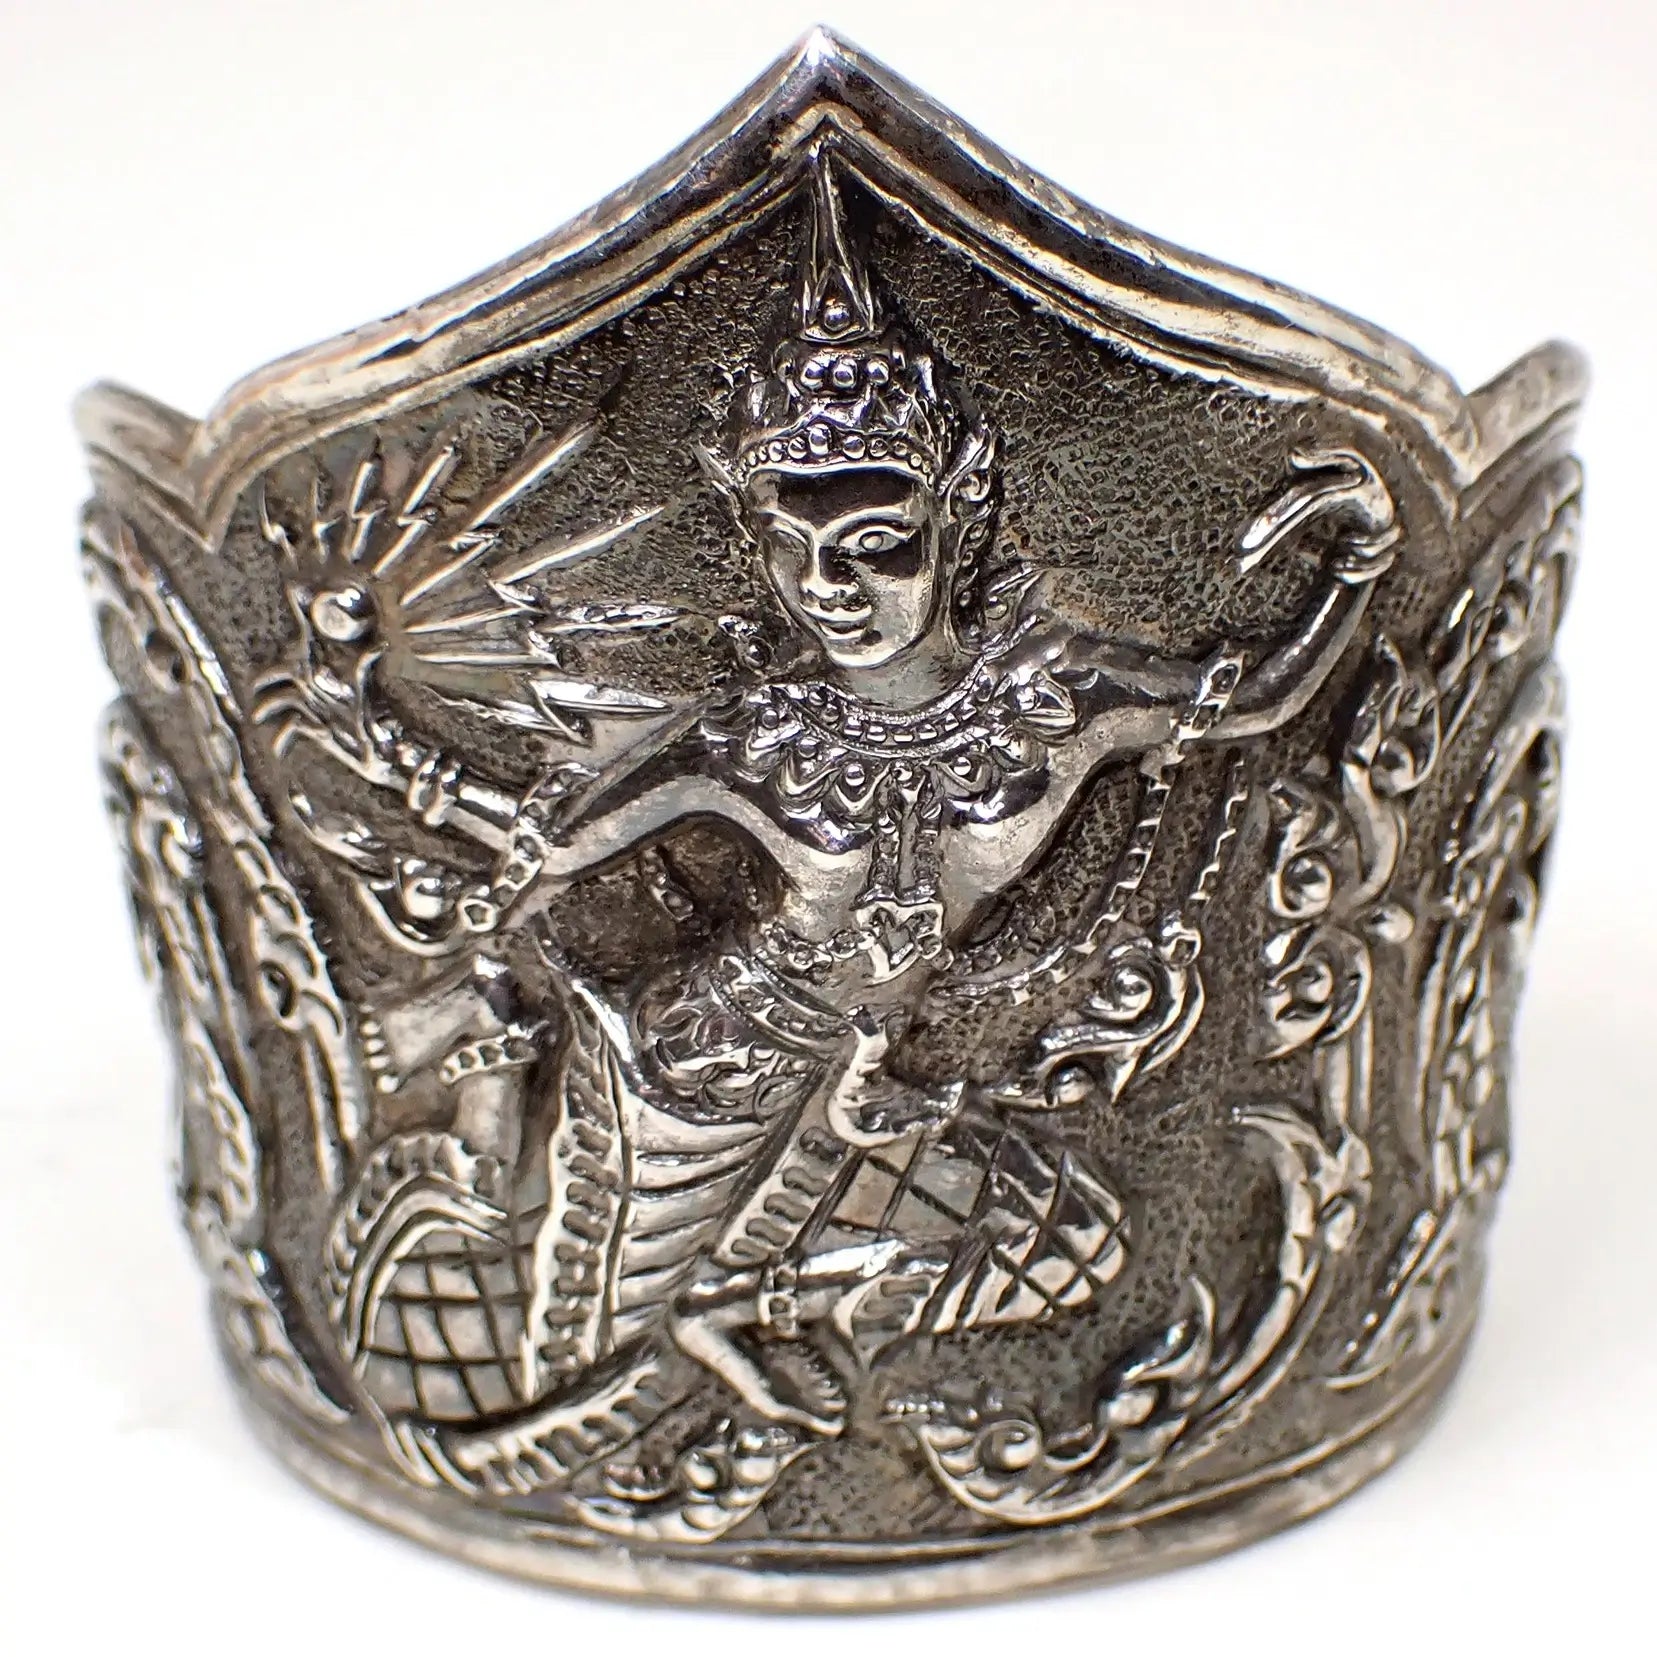 Front view of the Mid Century vintage Thai cuff bracelet. The sterling silver is a darkened gray in color. The bottom edge is rounded and the top edge has a point in the middle and rounded edges on the sides. There is a raised repousse design of a Siam dancer on the front with vines and leaves on either side. 